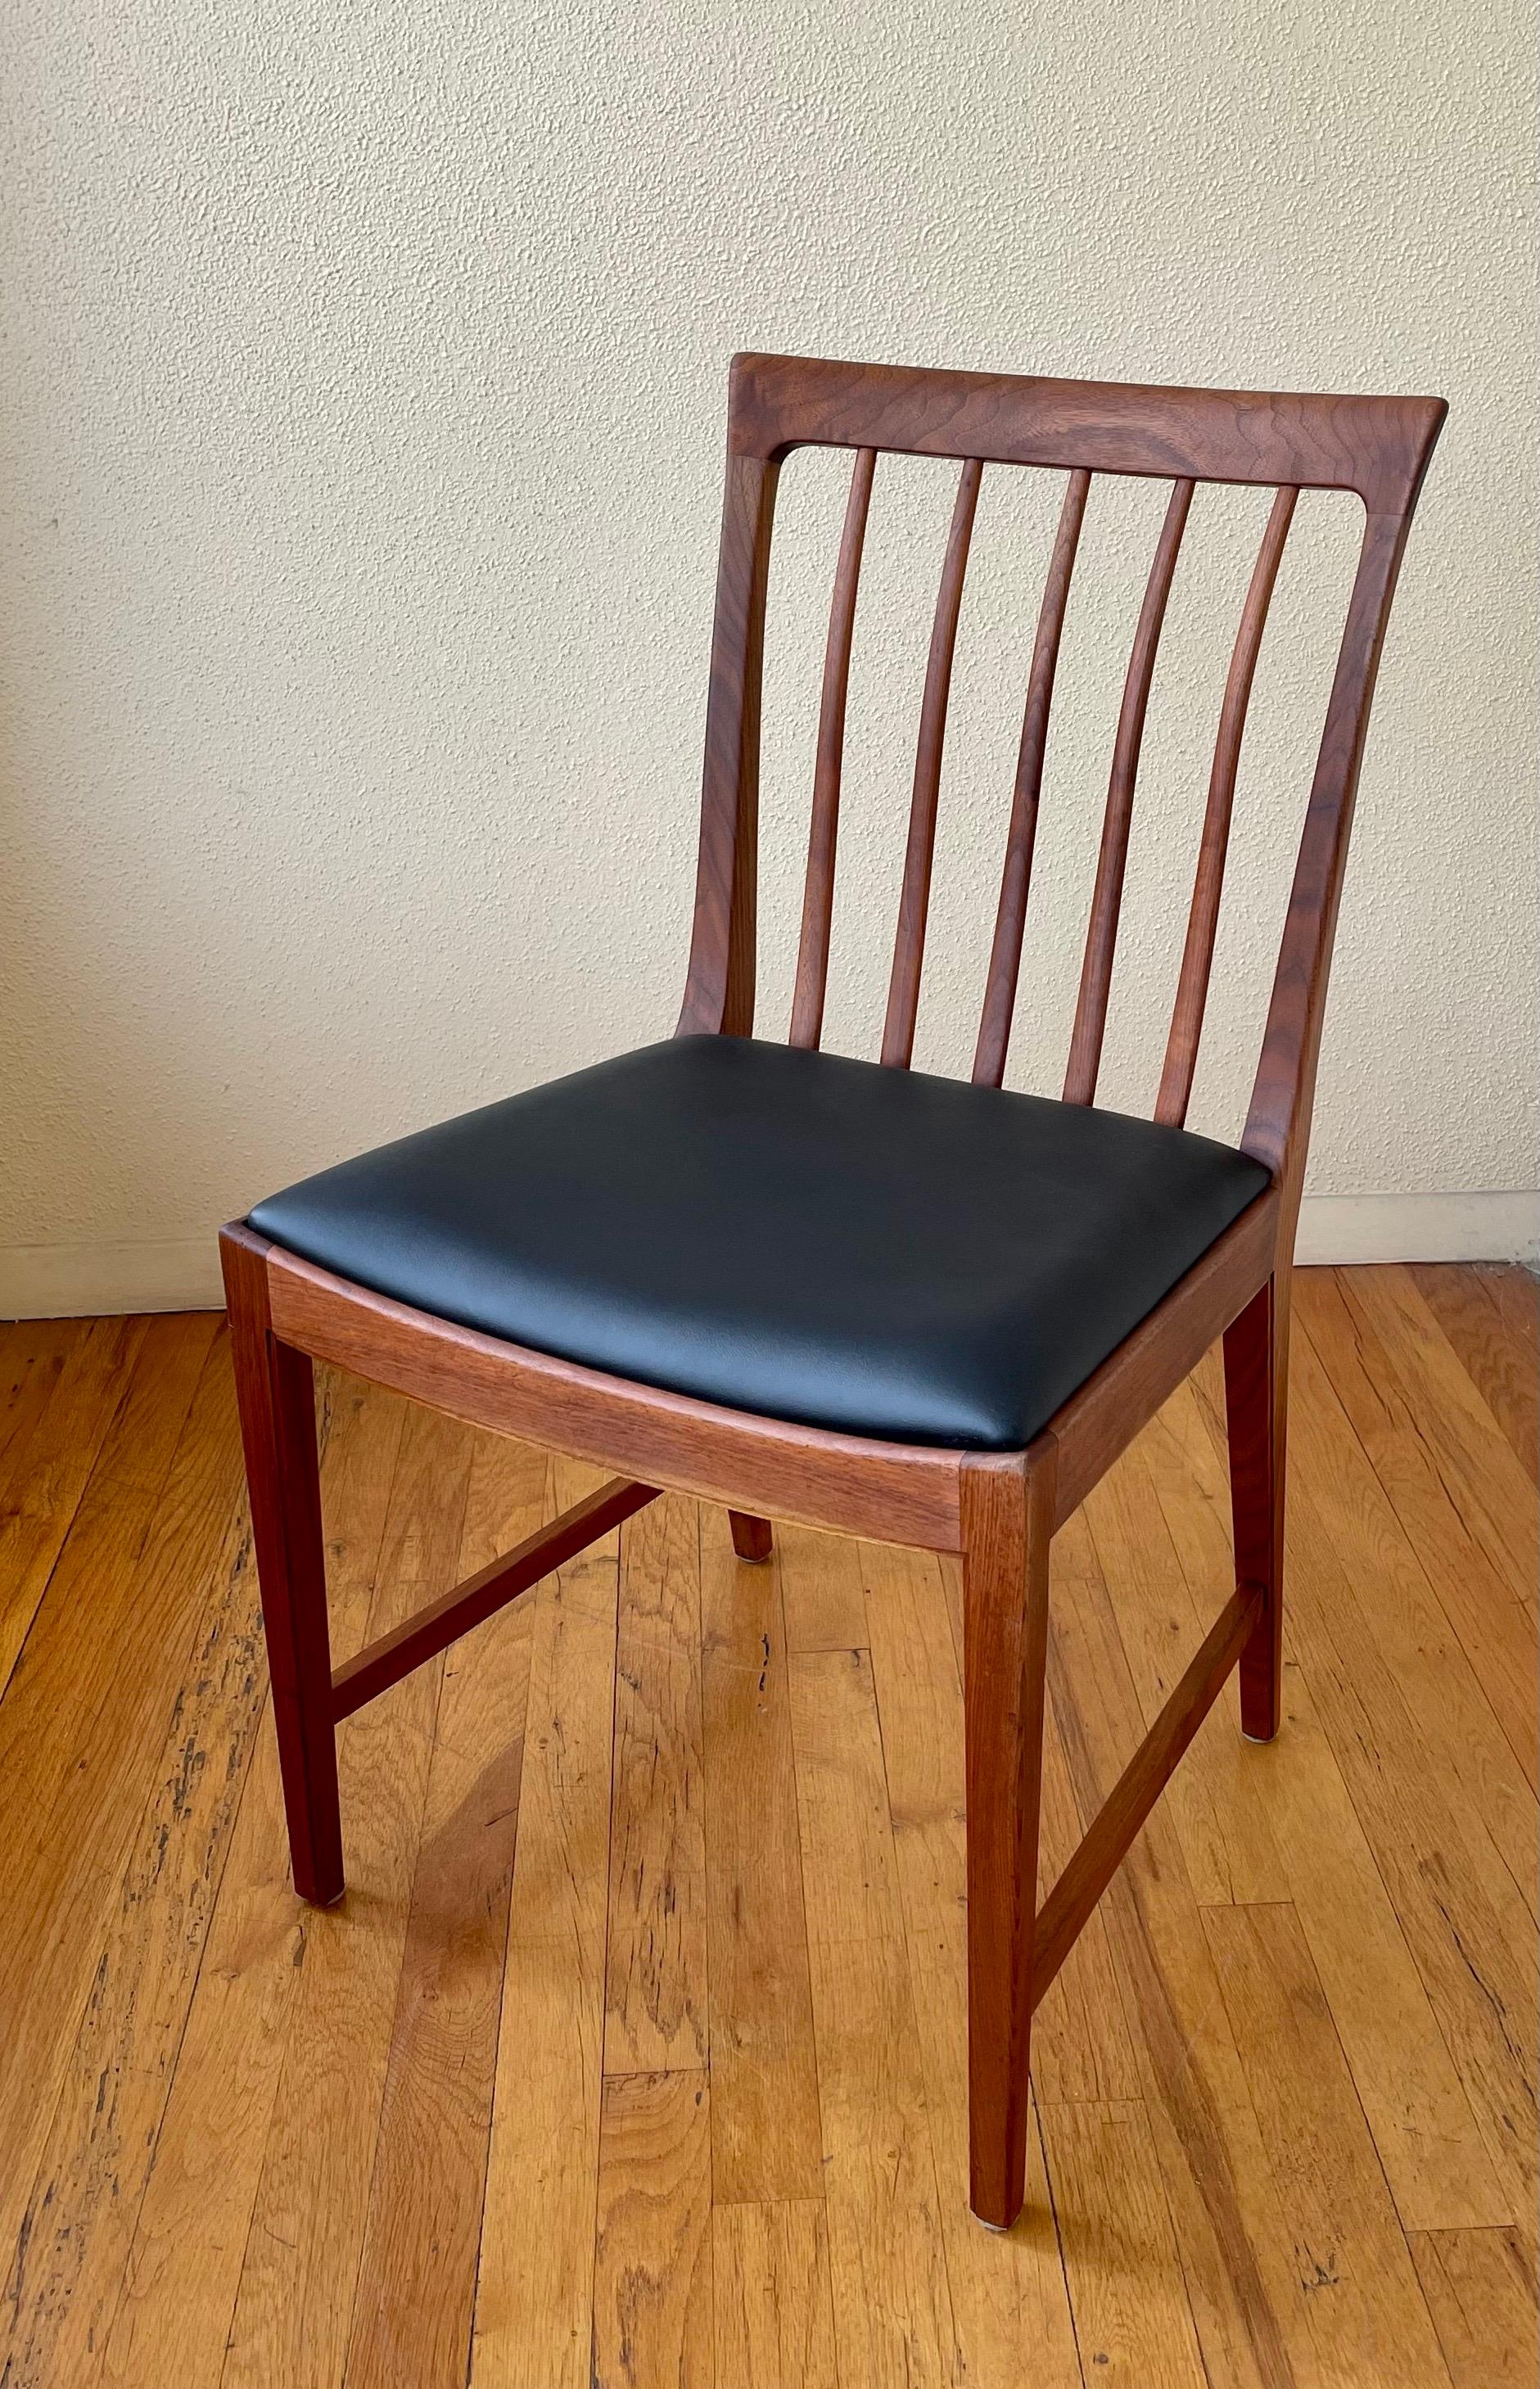 Beautiful elegant single desk chair in solid walnut sculpted frame, with freshly upholstered in black Naugahyde, solid sturdy we have restored the frame it's in very nice condition, circa 1950s. Made in Sweden by Moreddi.